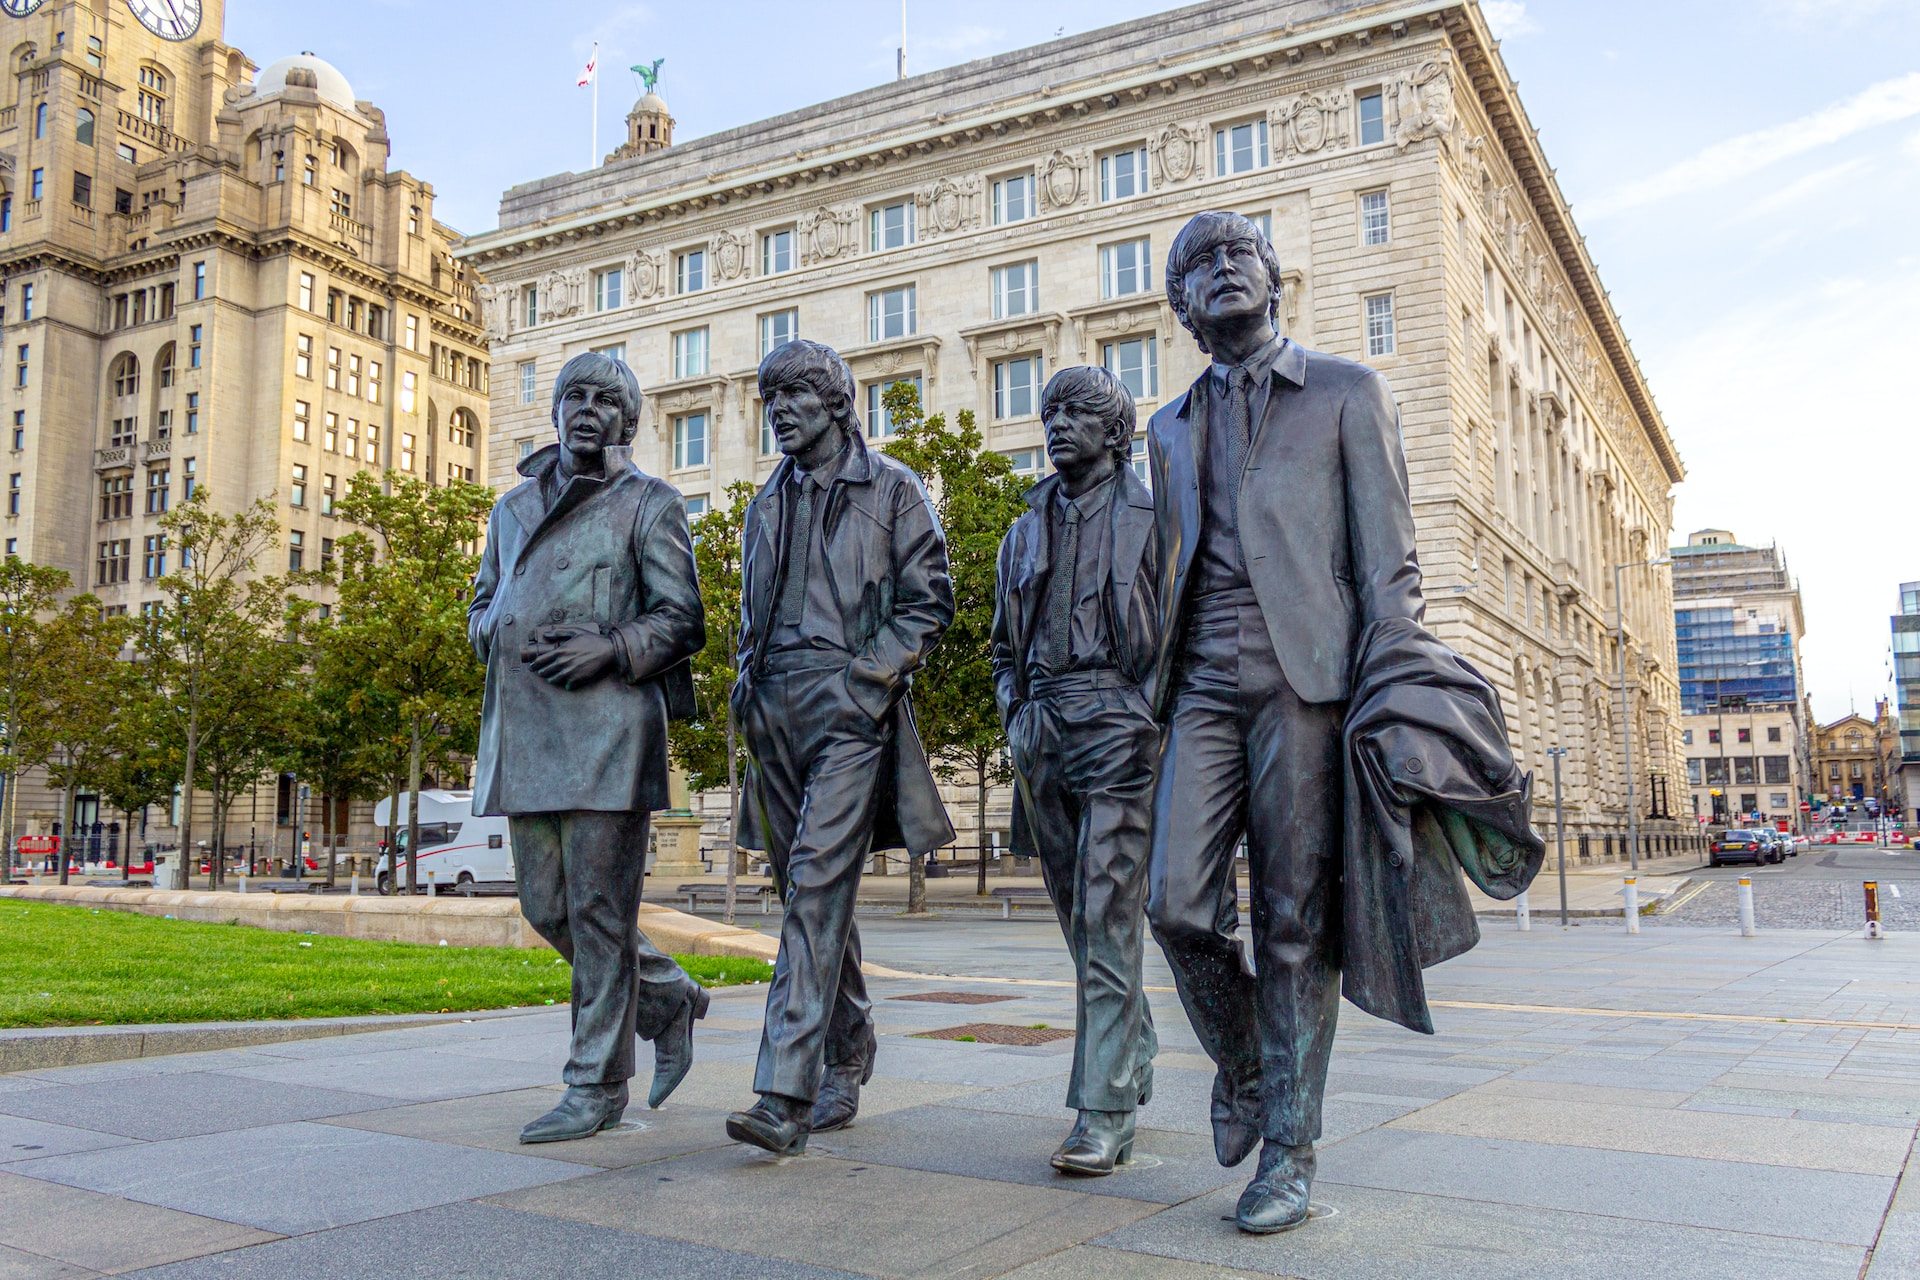 20 Things You Need To Know About Visiting Liverpool